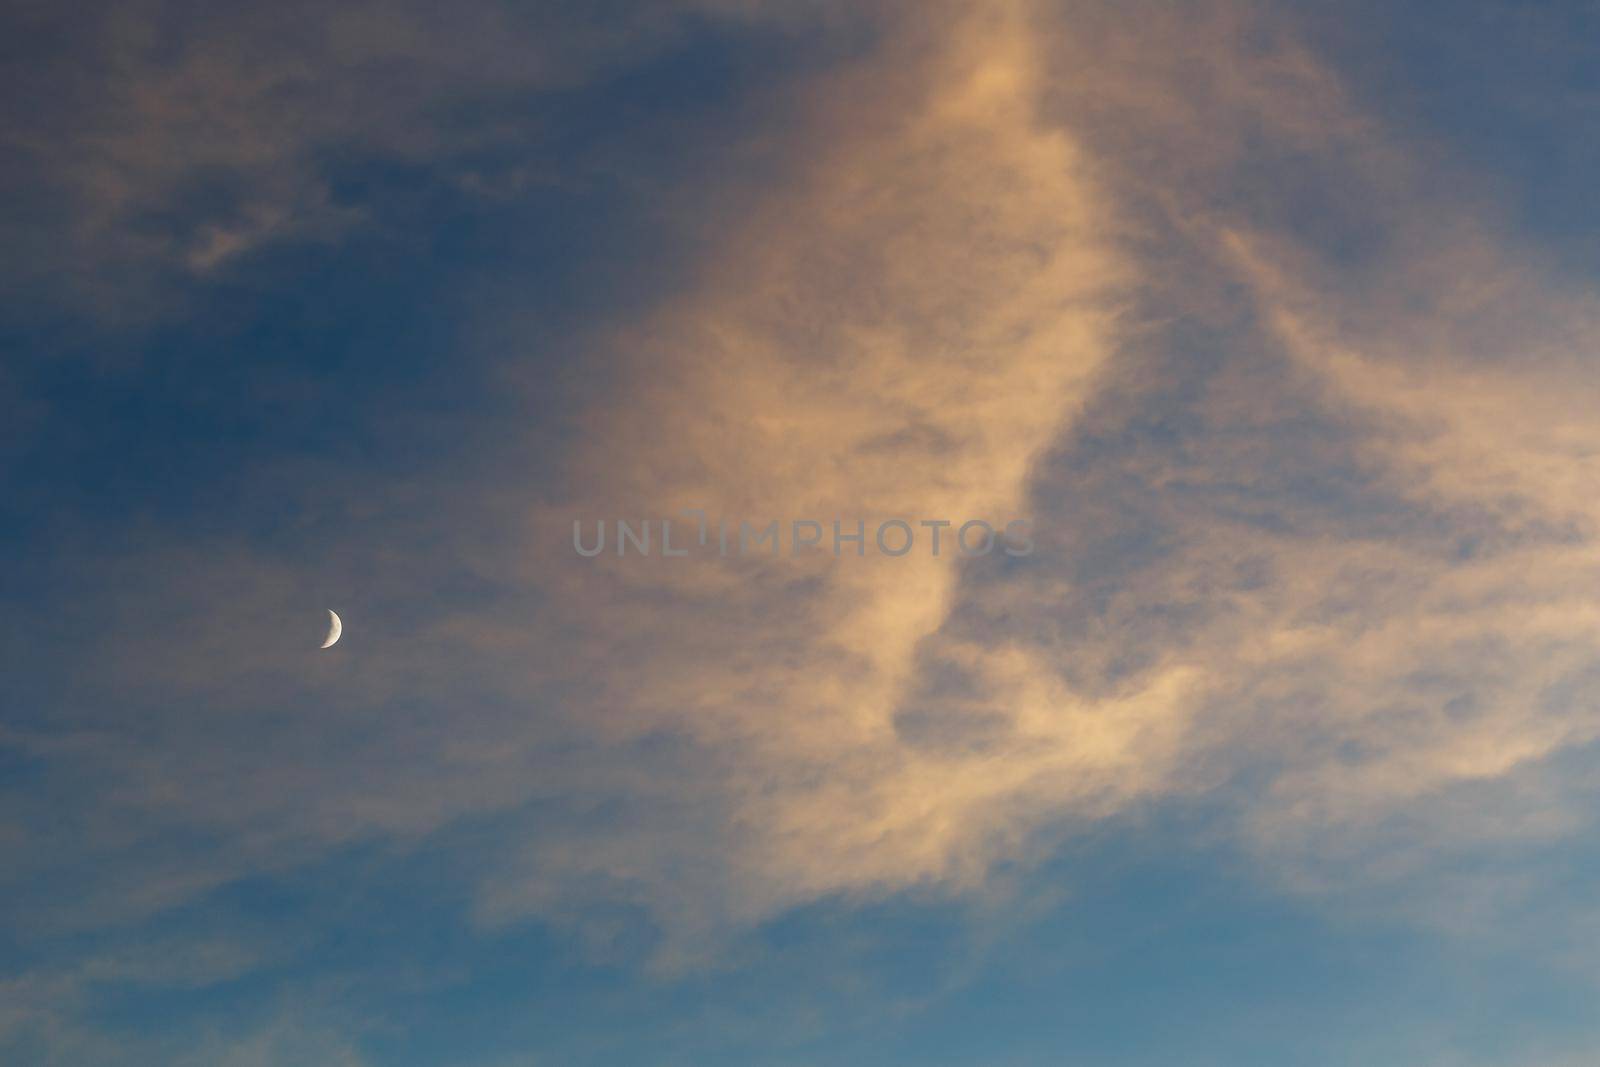 Growing moon in the blue sky among the clouds lit by the sun at sunset. Blue, pink and orange color